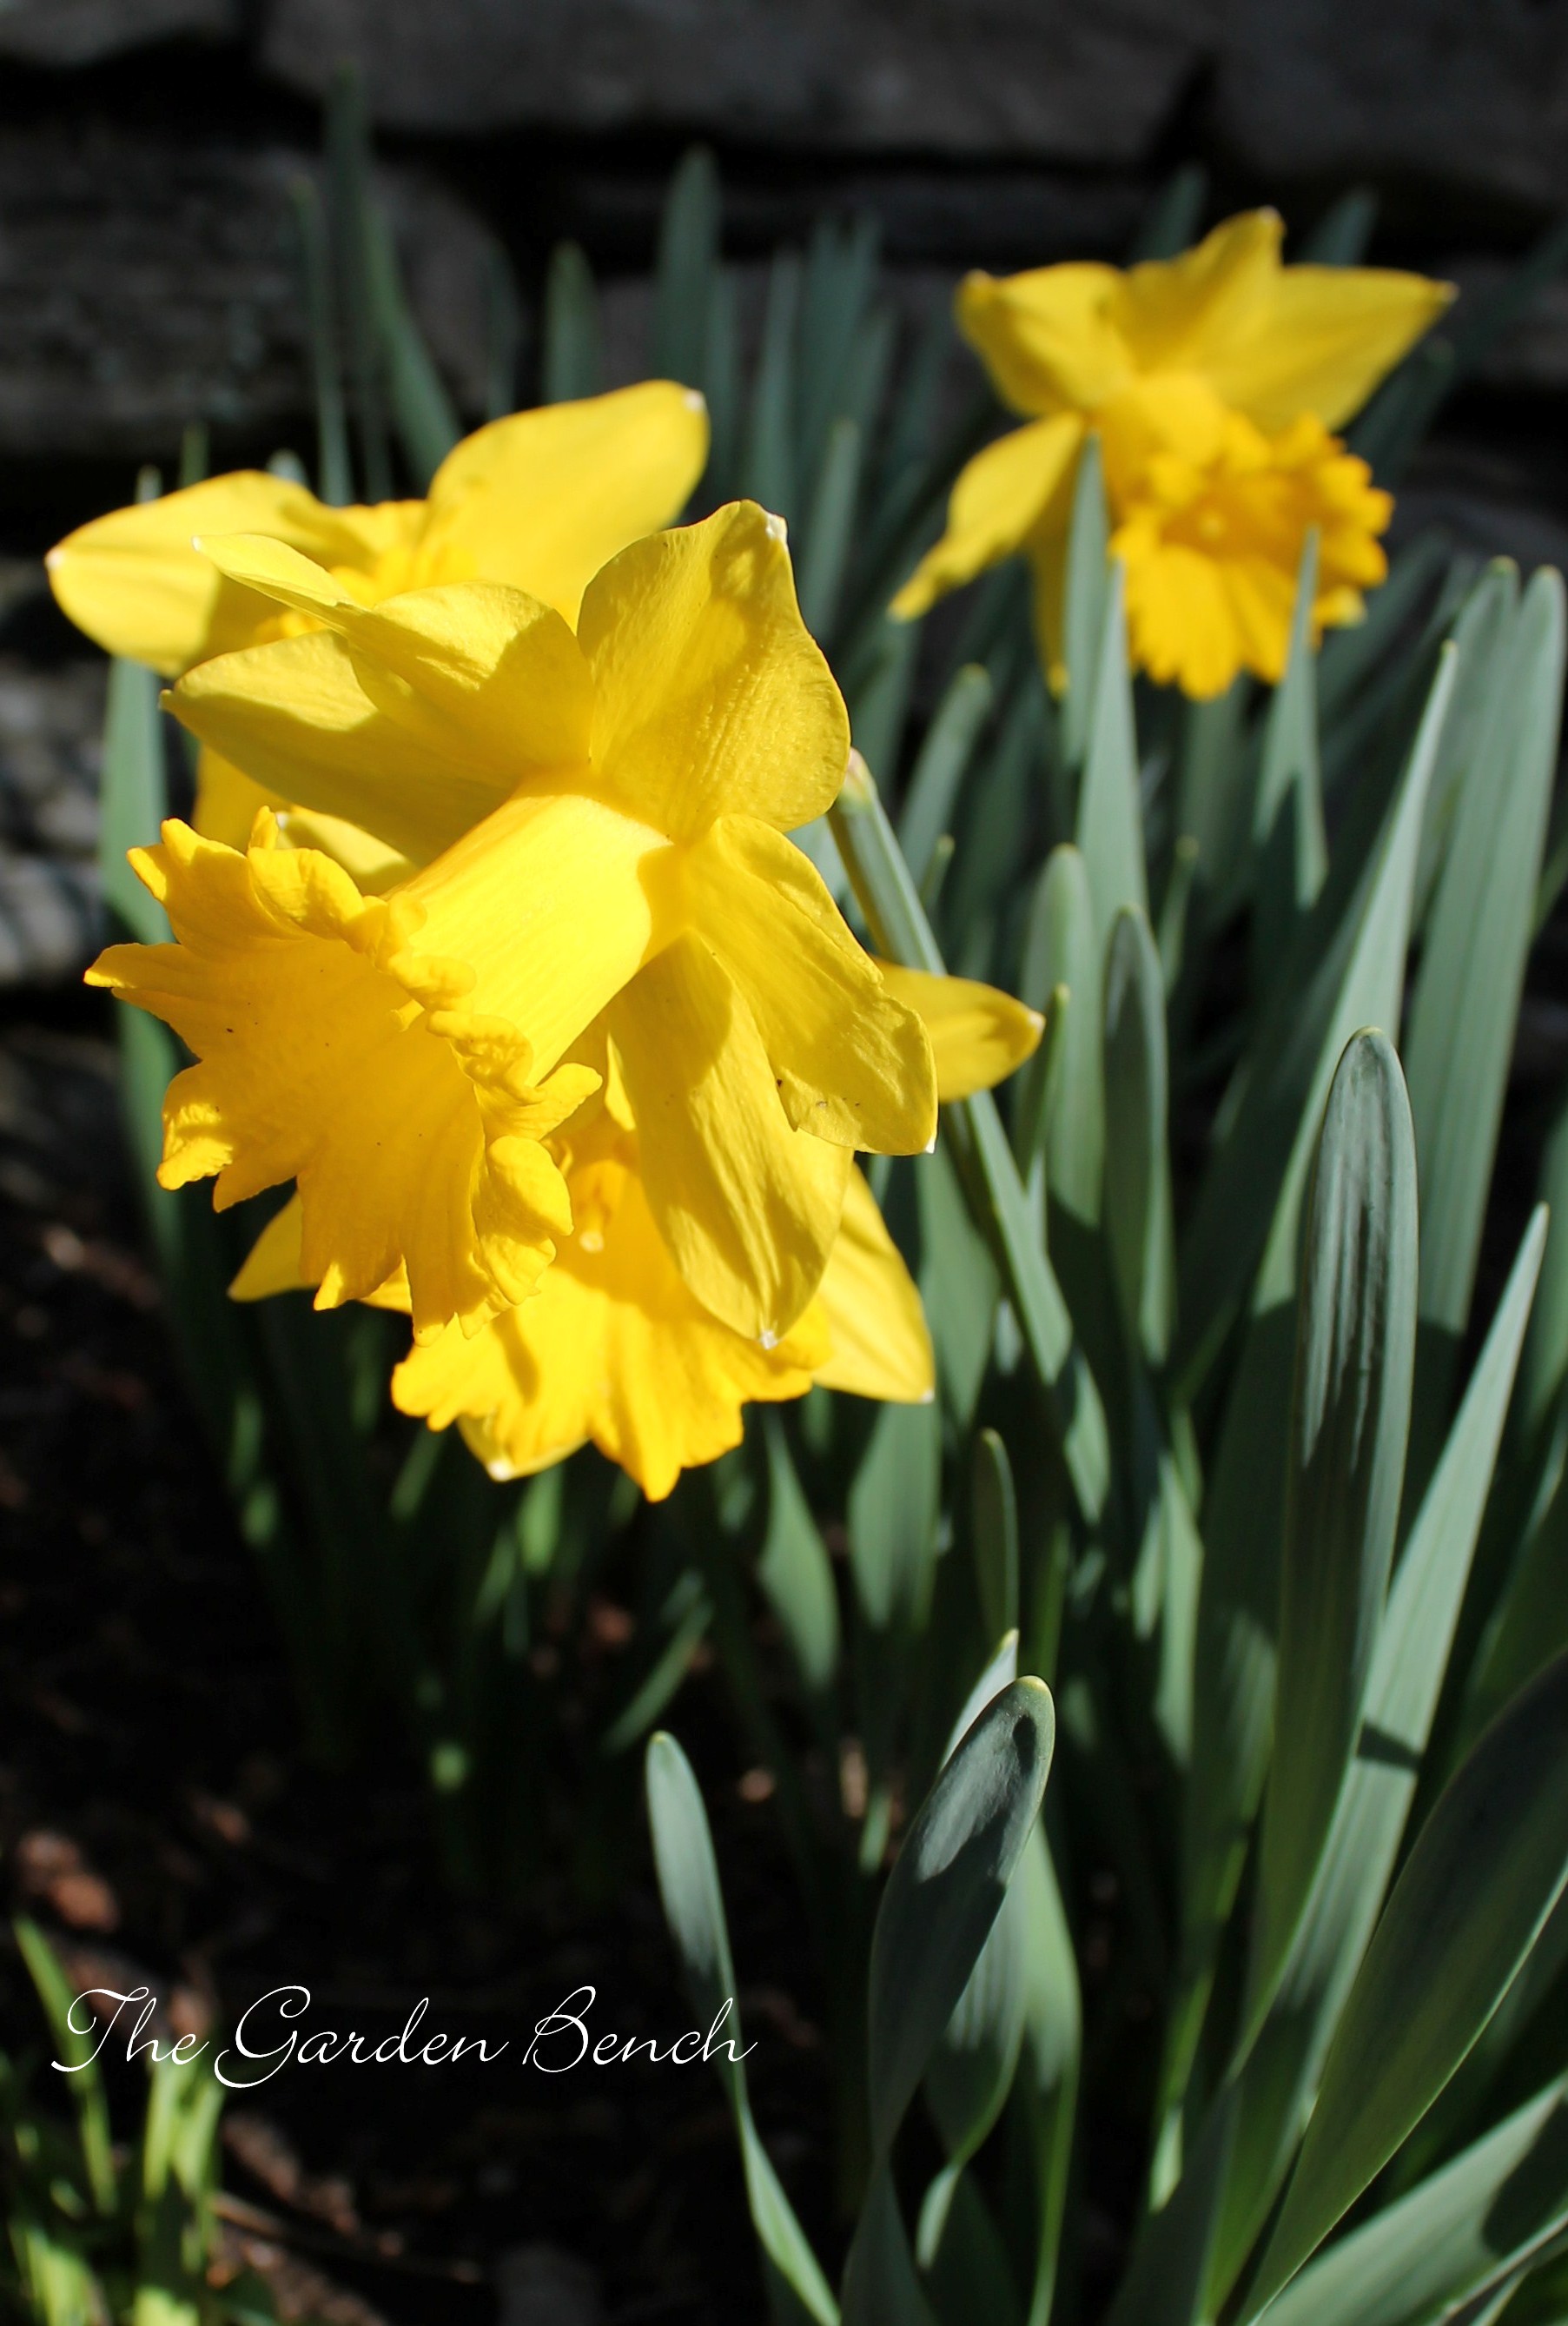 Daffodil dreams? Time to plant bulbs | The Garden Bench